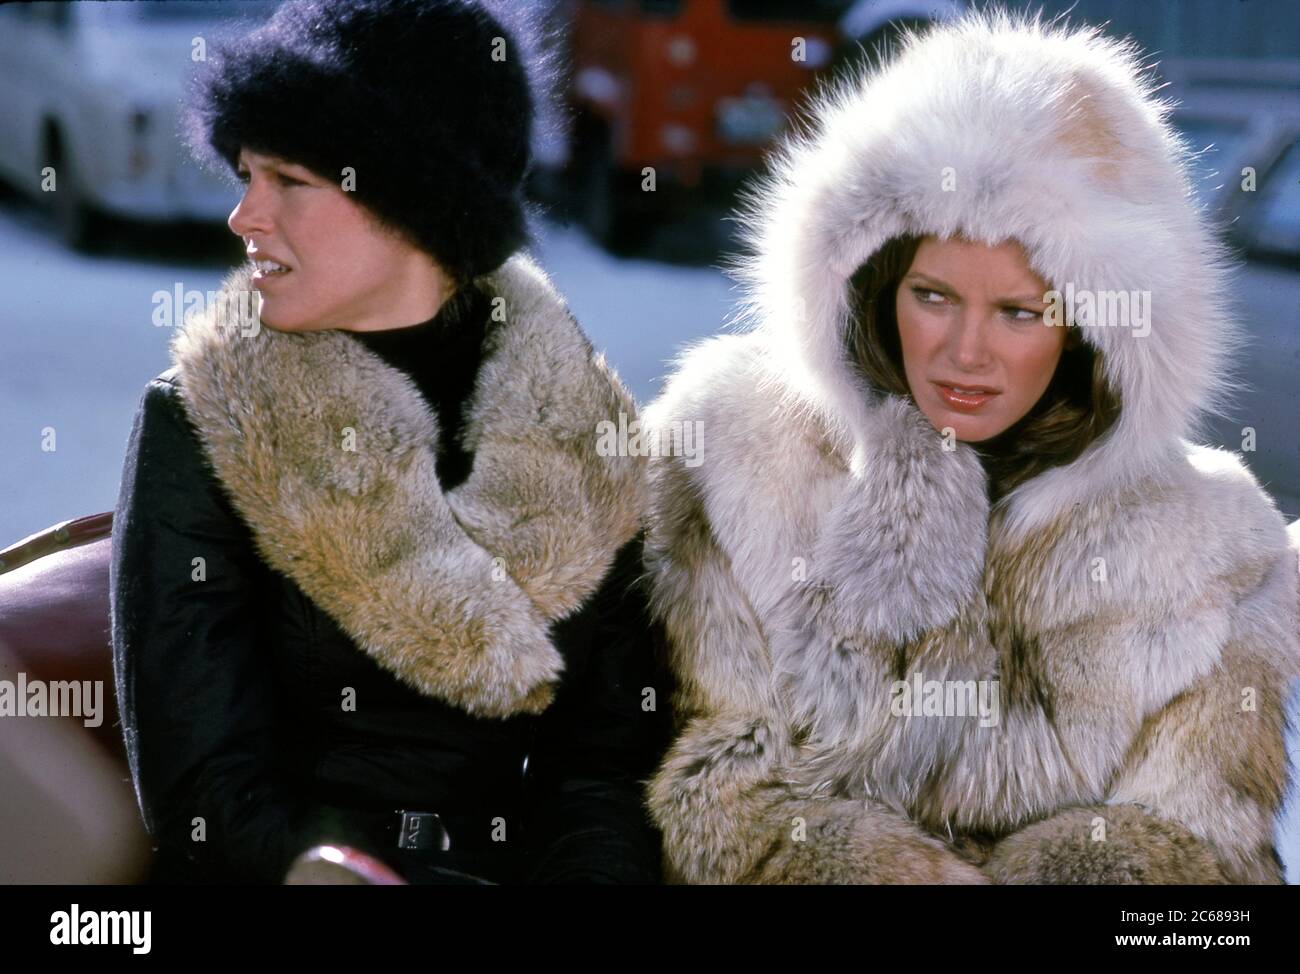 Cheryl Ladd and Jaclyn Smith filming an episode of hit TV show Charlies Angels in Vail, CO circa 1978 Stock Photo